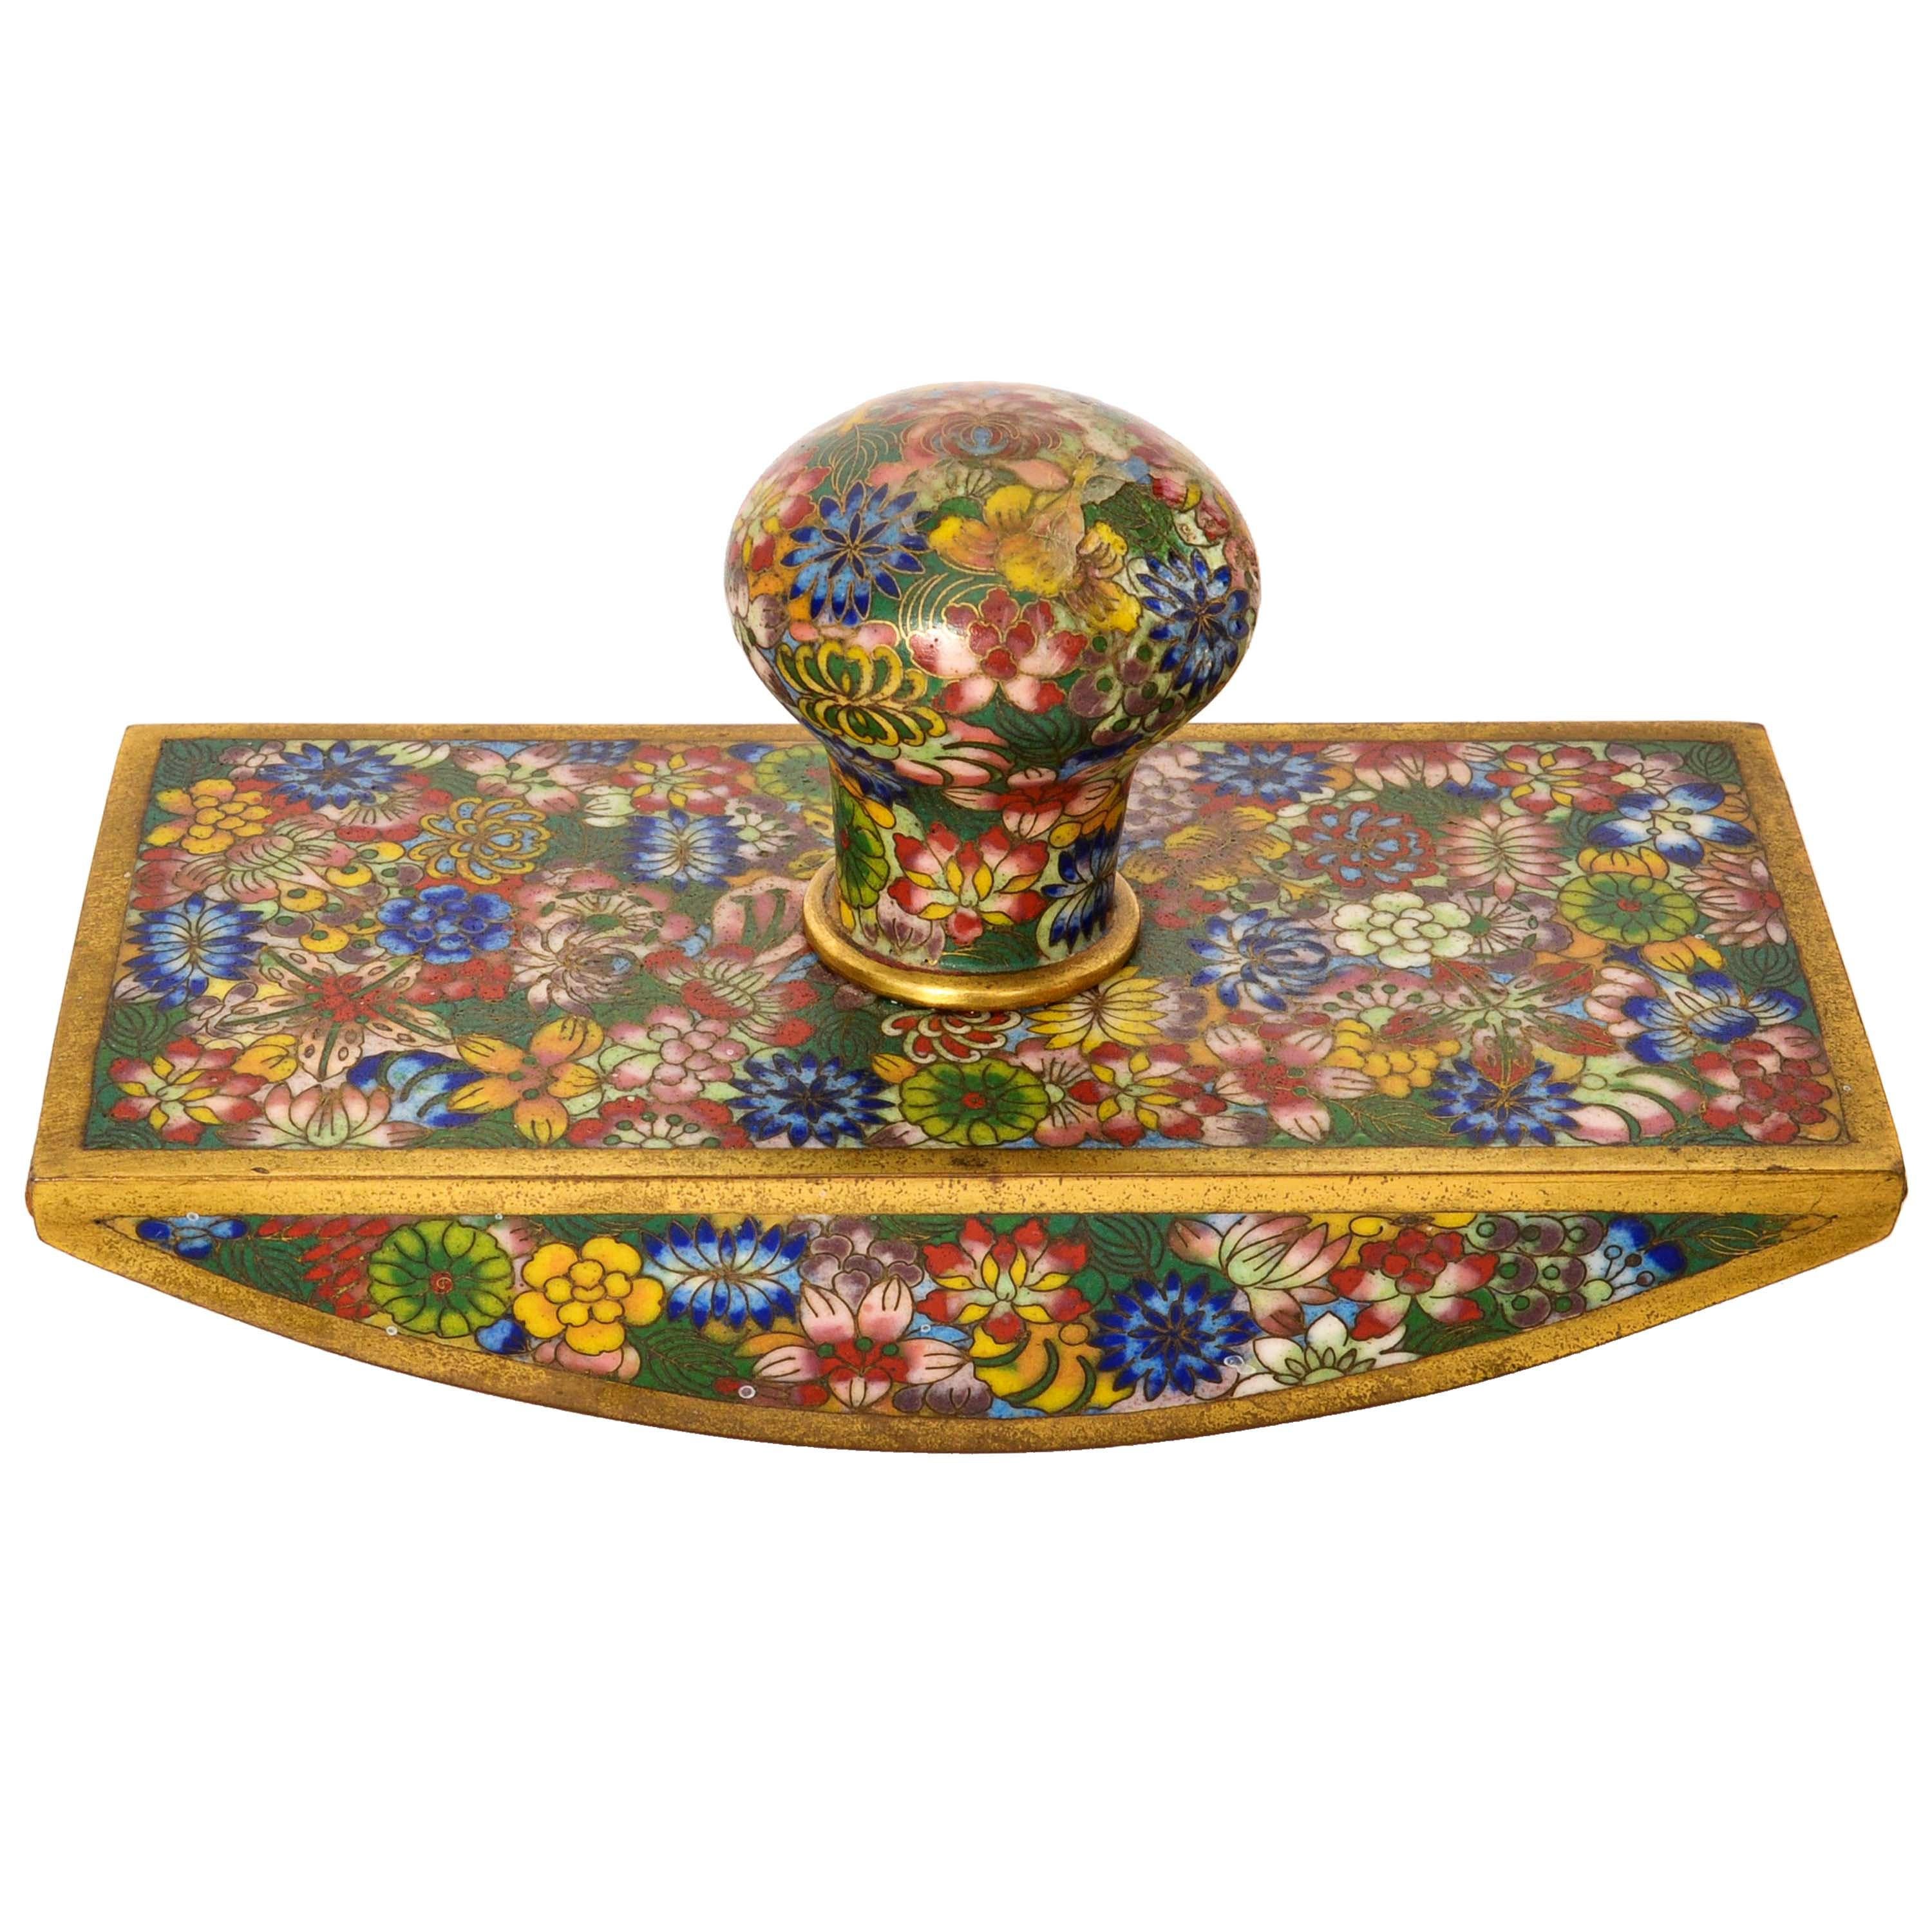 A good quality antique six piece Chinese cloisonne desk set, circa 1900.
The desk set made of cloisonne (enamel on copper) and having a Miller Fleur (Thousand Flowers) design, the set comprises a hinged lidded flared inkwell, a rocking blotter and